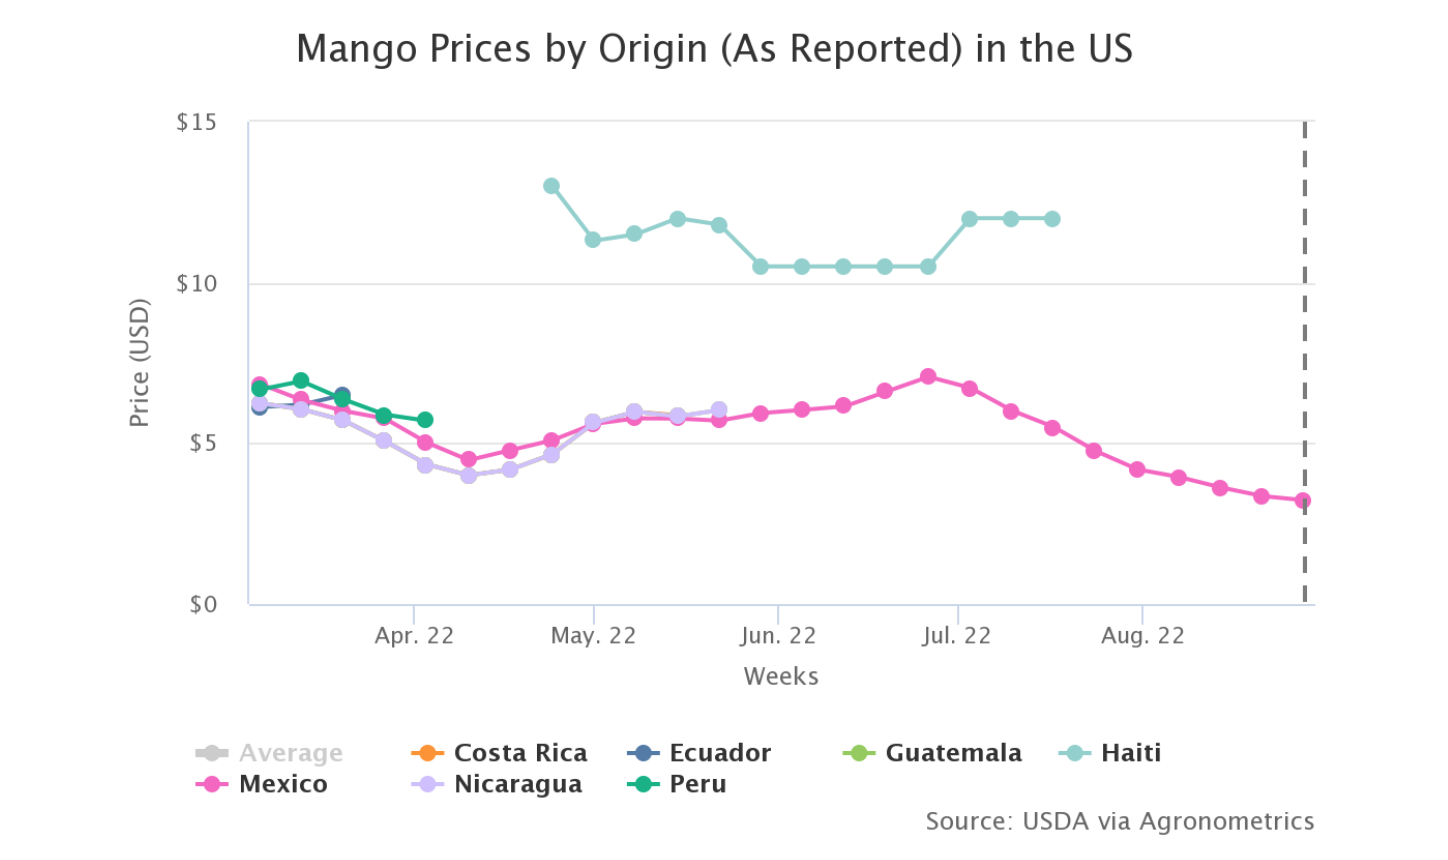 prices for Haitian mangoes in the United States compared to other sources